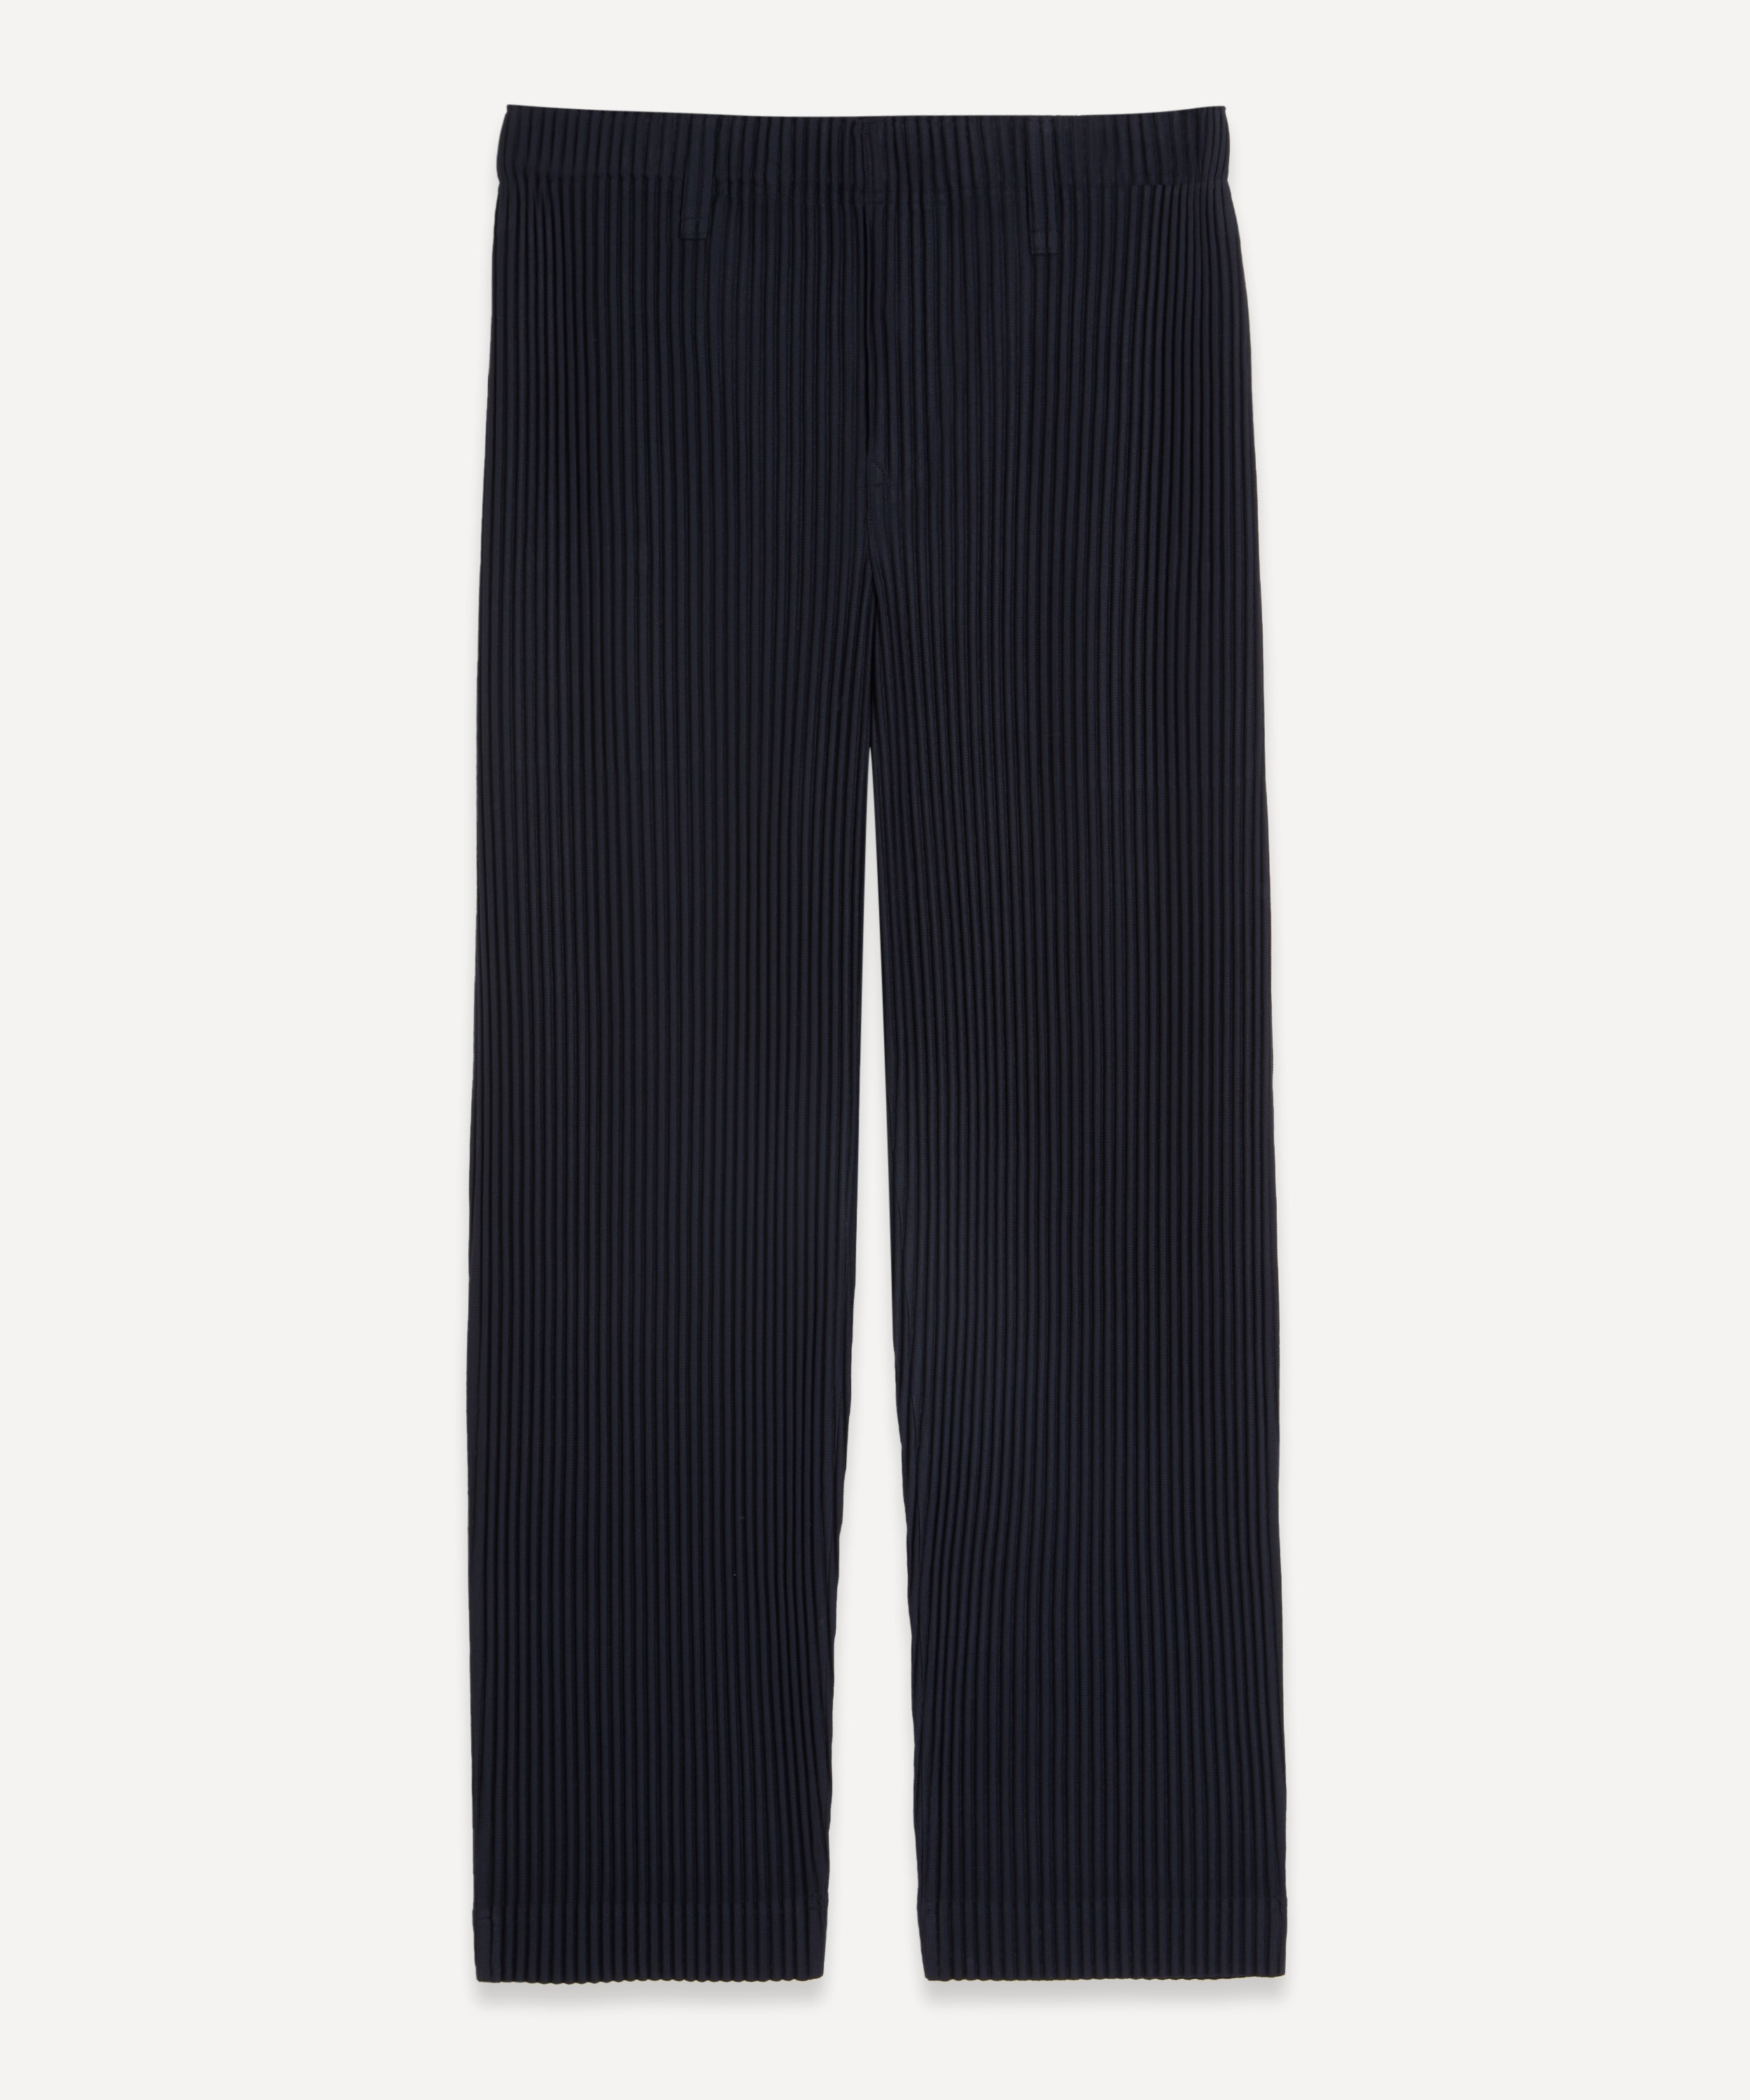 HOMME PLISSÉ ISSEY MIYAKE - Pleated Straight Leg Trousers image number null